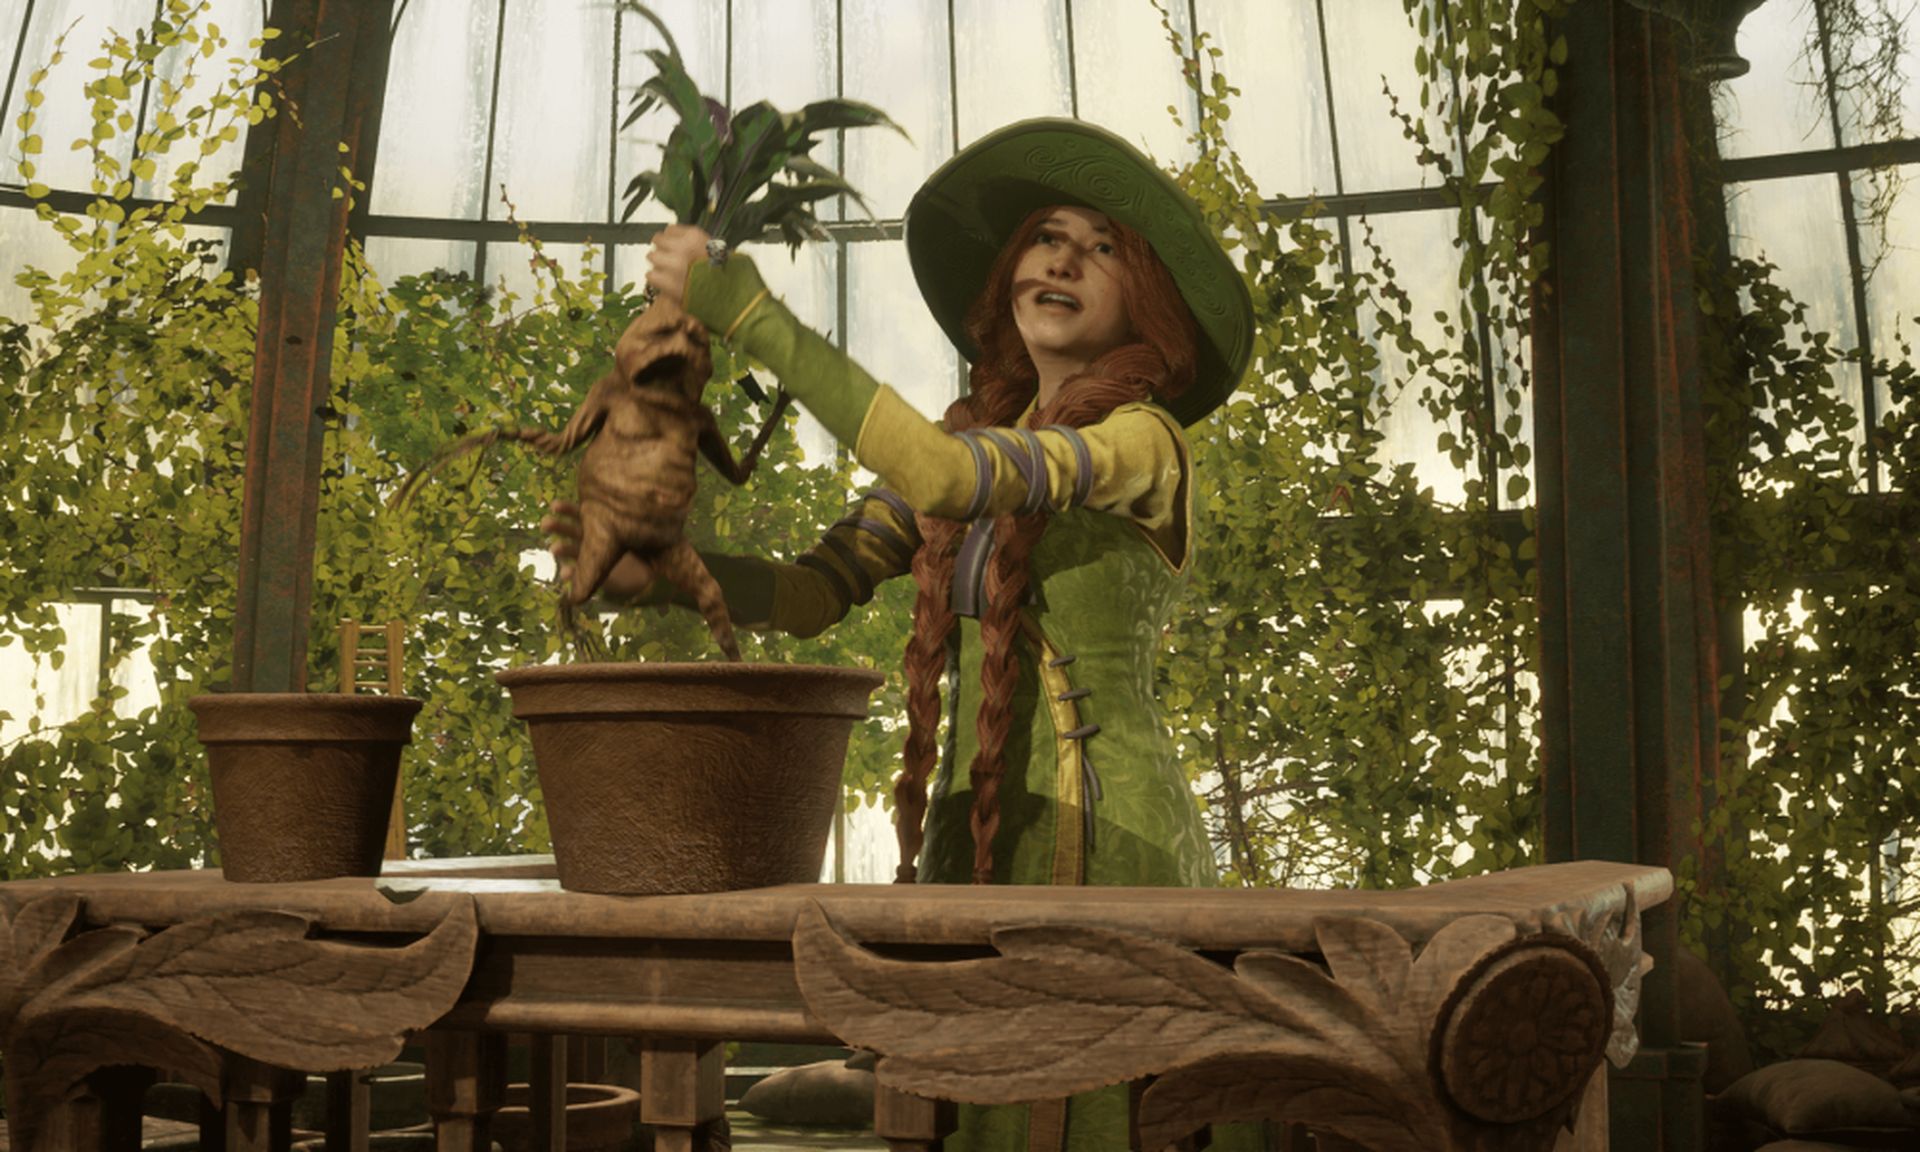 Today, we'll be going over Hogwarts Legacy Mandrake locations as well as how do you buy and plant Mandrake seeds, so you have them whenever you need them in...